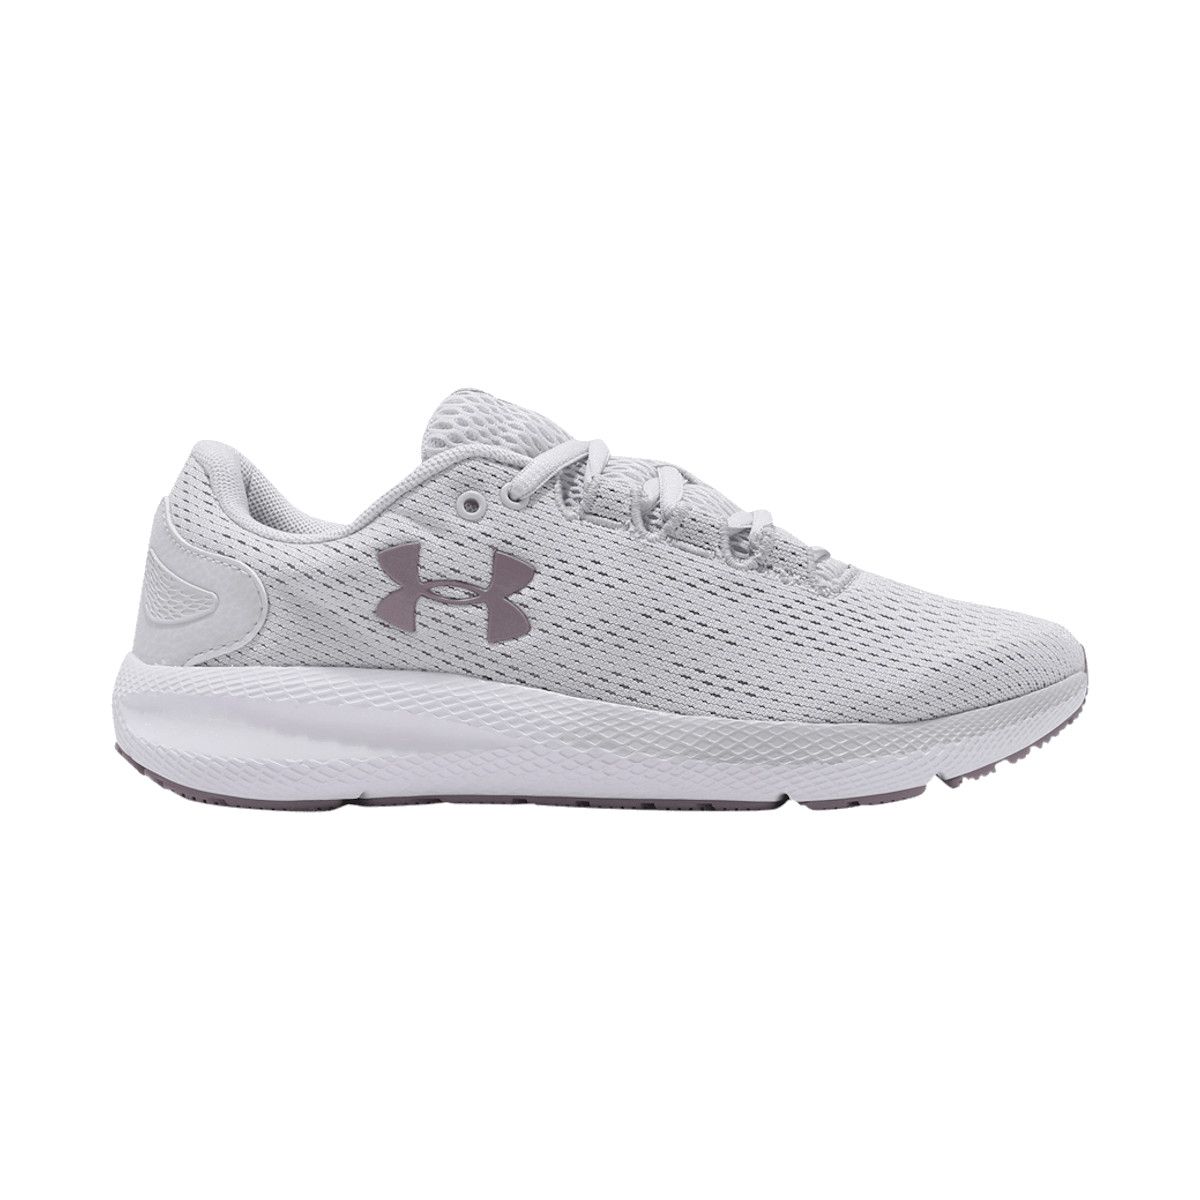 Under Armour Charged Pursuit 2 Women's Running Shoes 3022604